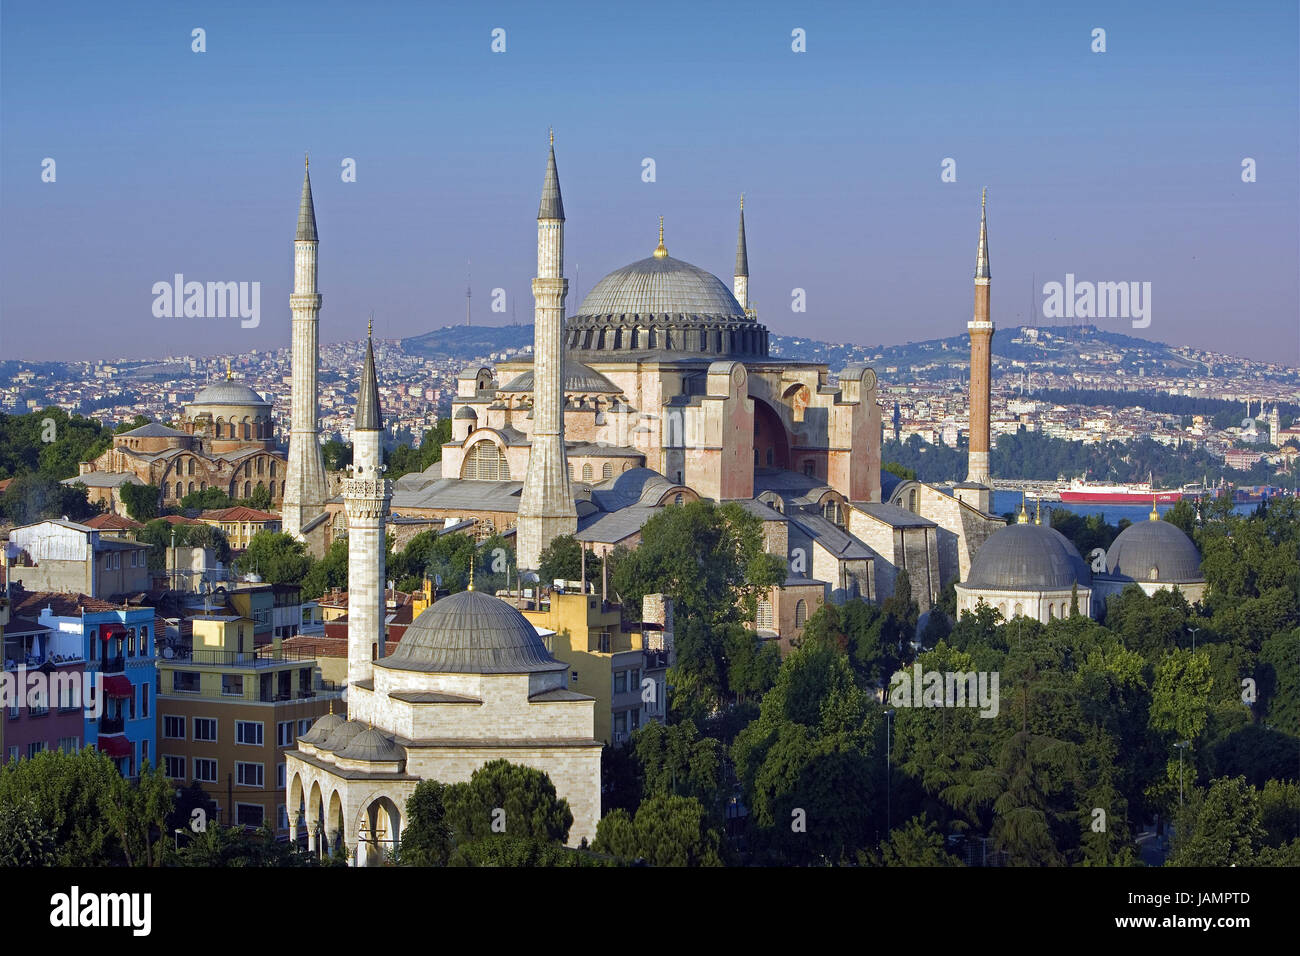 Turkey,Istanbul,town view,Hagia Sophia,Ayasofya museum,town,city,metropolis,culture,tourism,place of interest,structure,architecture,landmark,historically,UNESCO-world cultural heritage,domes,minarets, Stock Photo